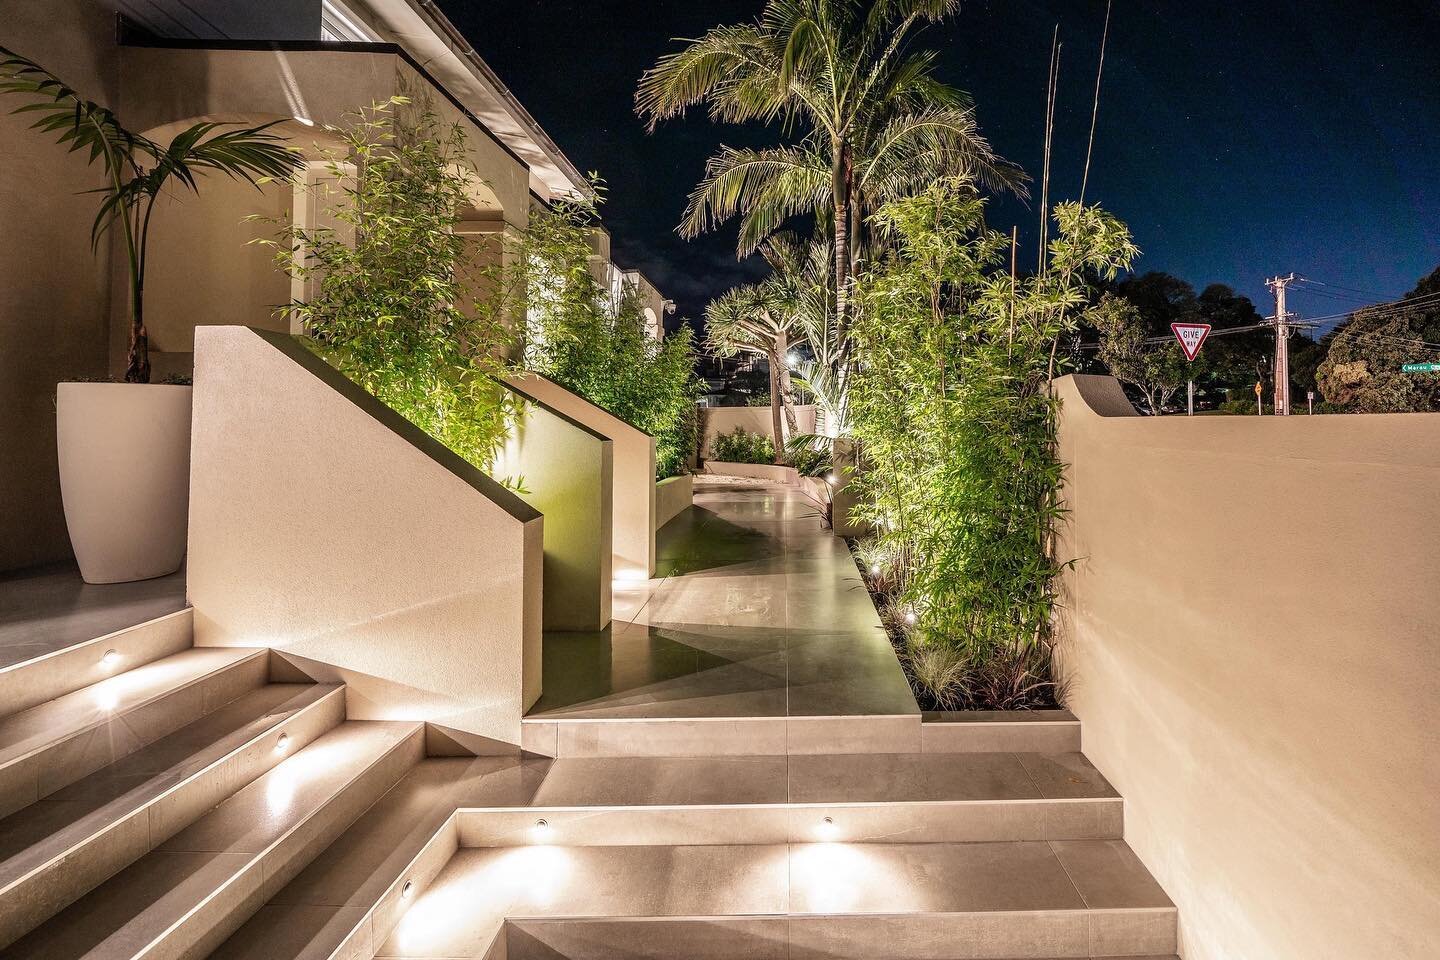 @switchlightingnz exterior step lights not only look awesome, but also safely light up steps and pathways. And because they are only 1.6W LEDs, they can be left on all night without worrying about an expensive power bill.